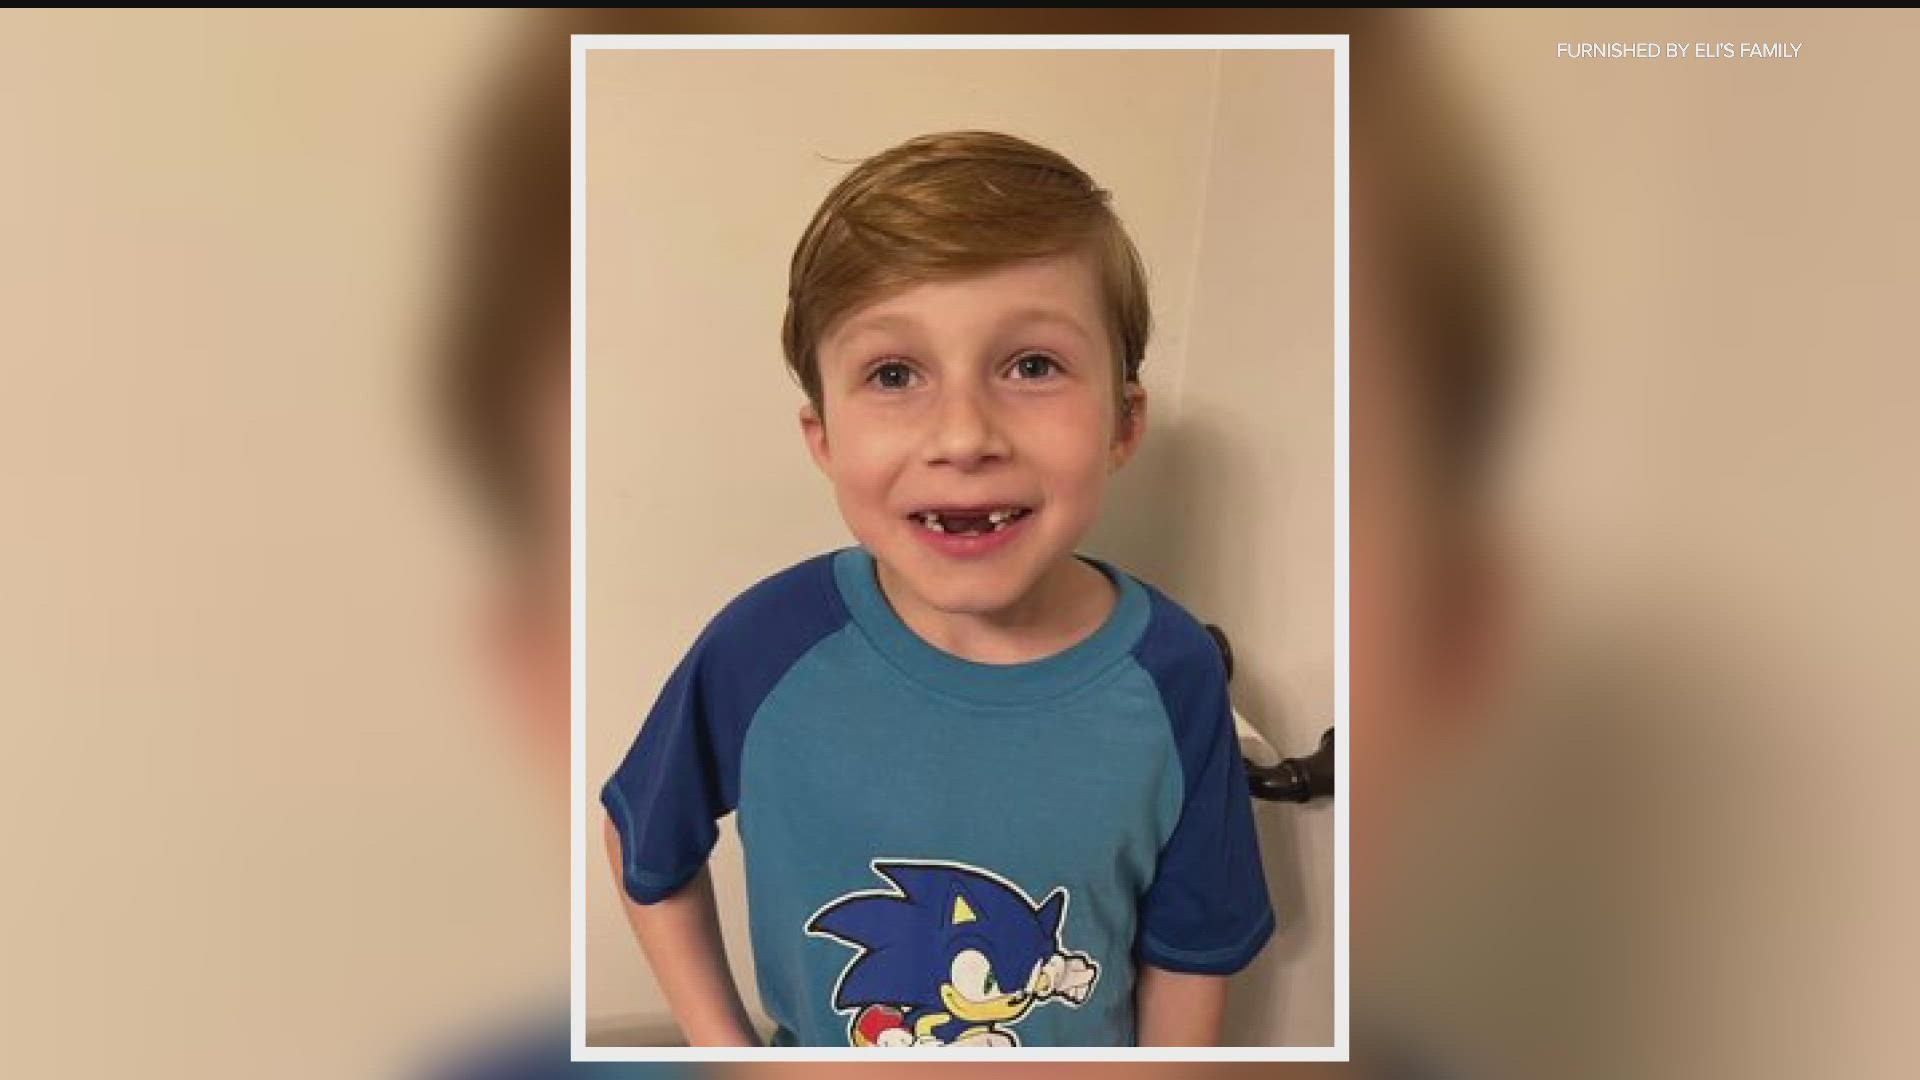 According to family, the victim is 6-year-old Eli. On Friday, Orono Police said two people had been arrested in connection to the death.